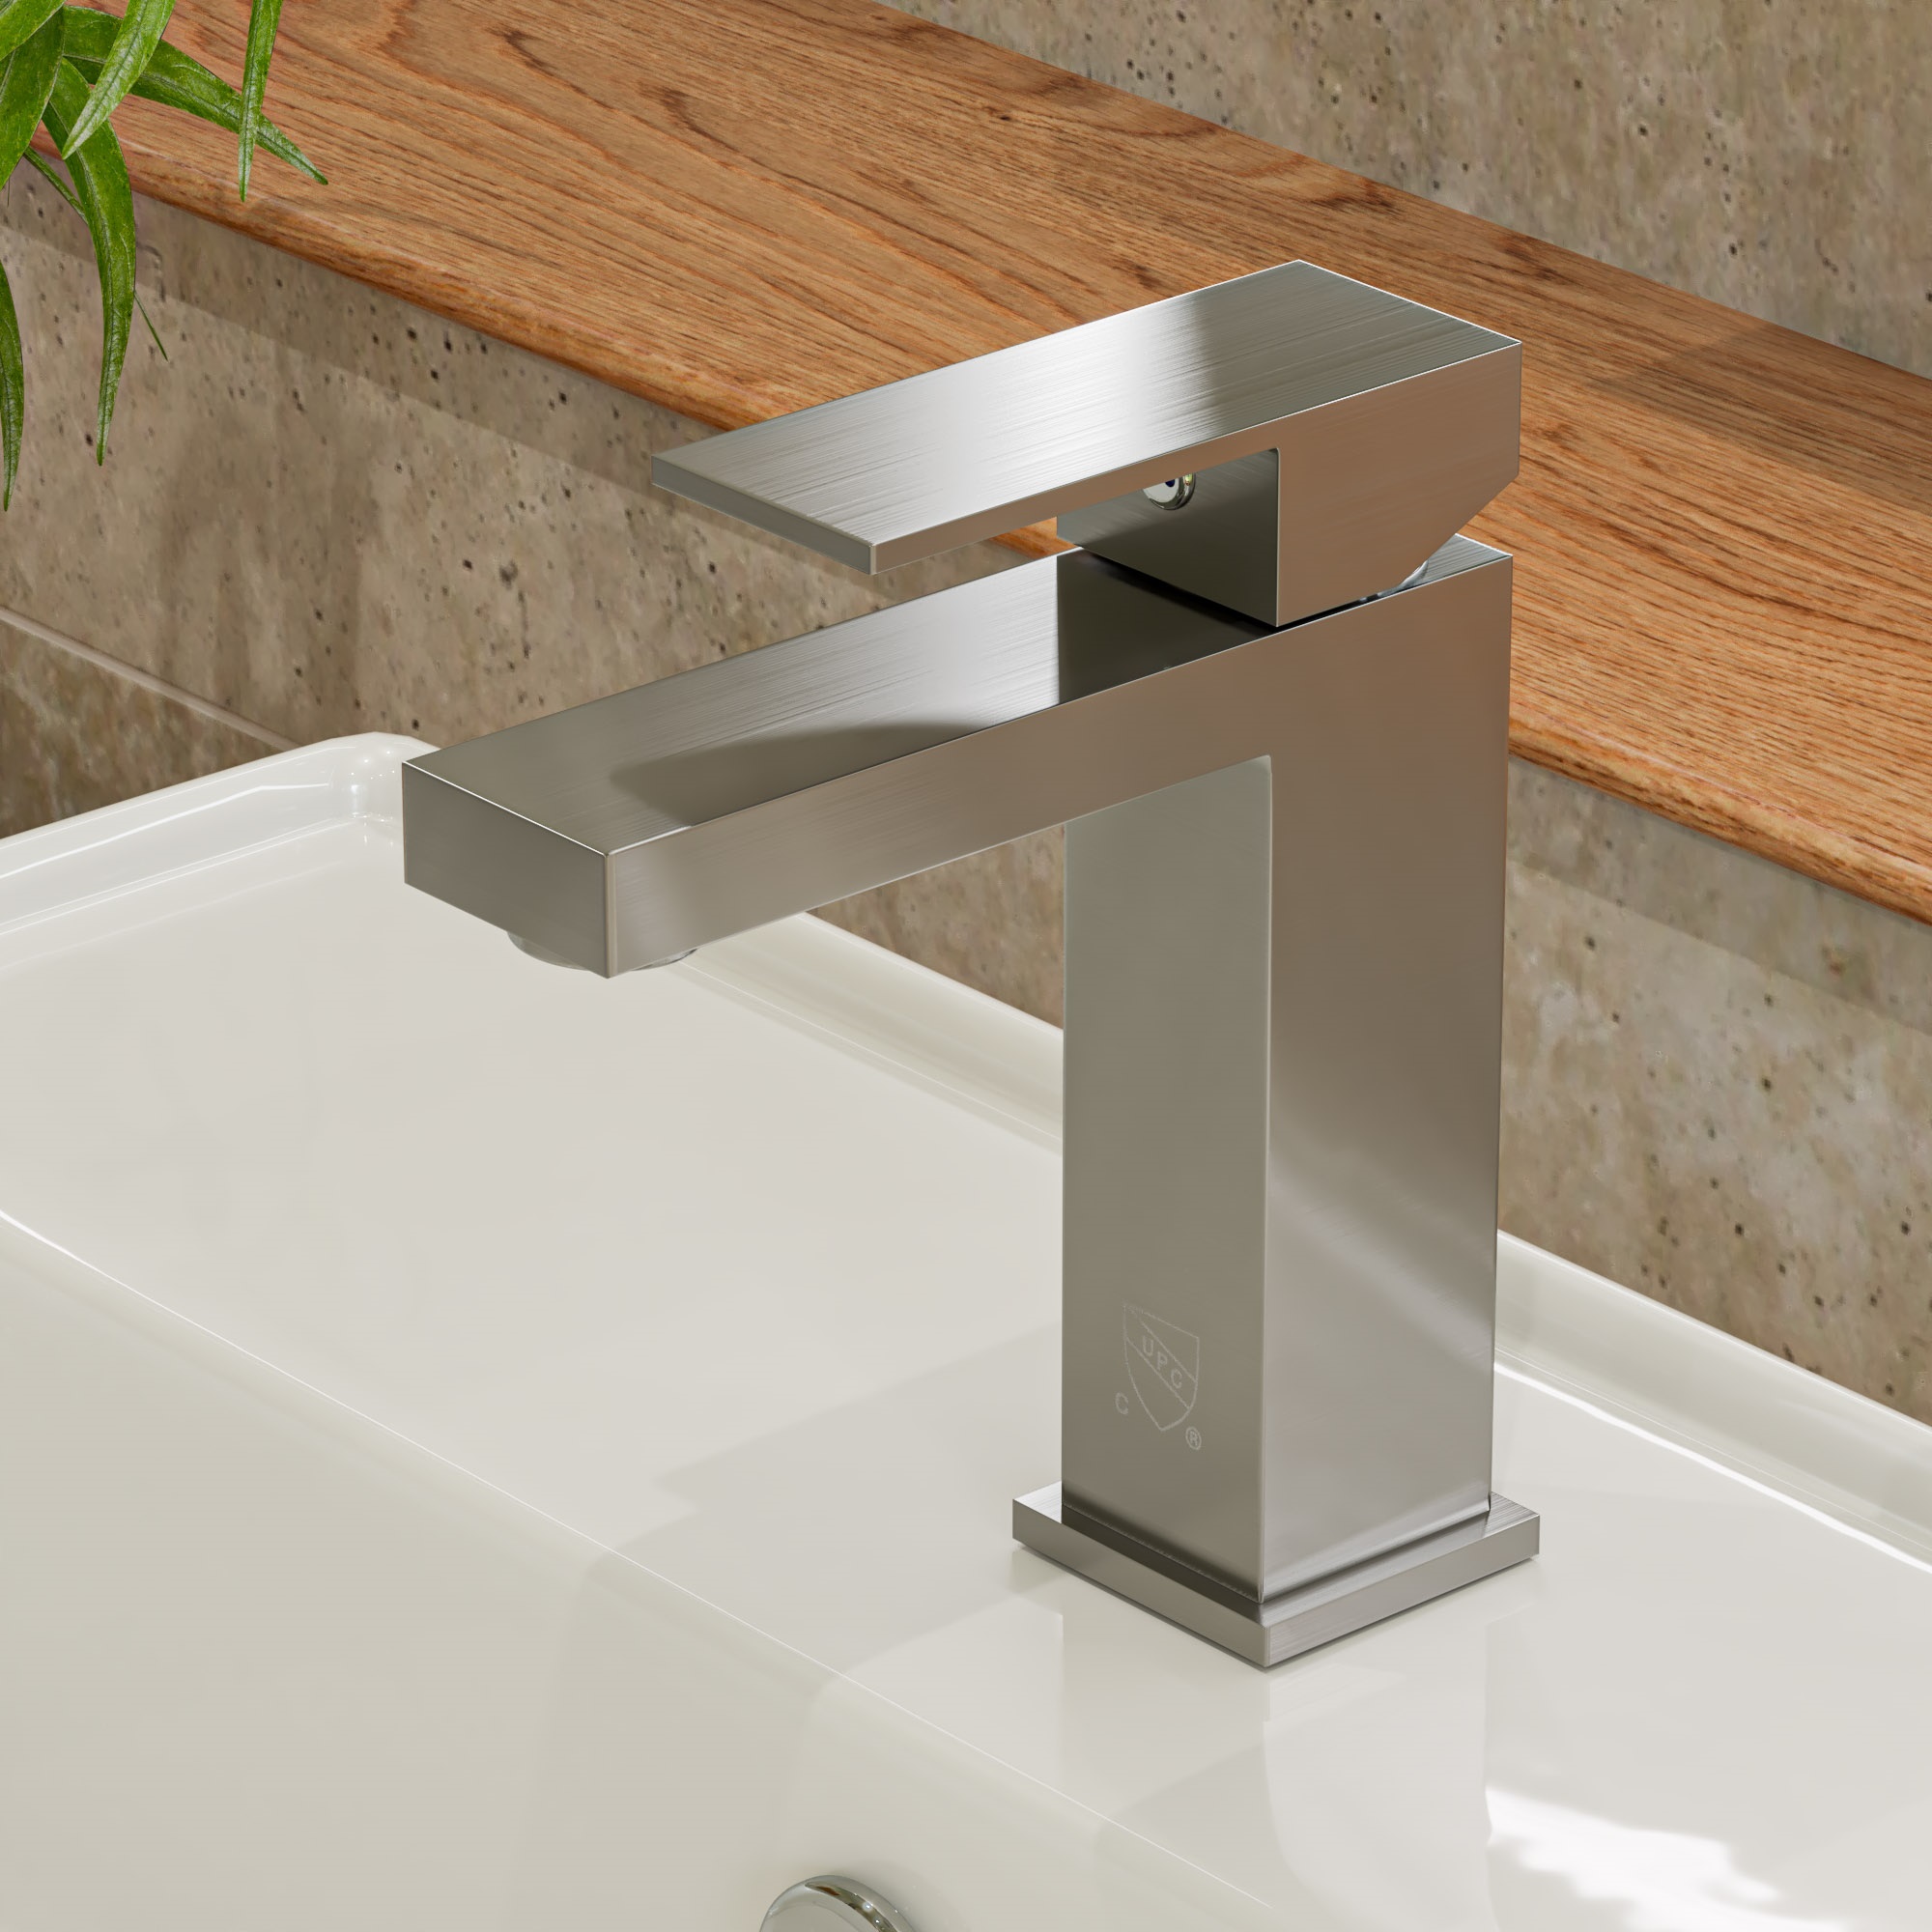 Ab1229-bn Brushed Nickel Square Single Lever Bathroom Faucet